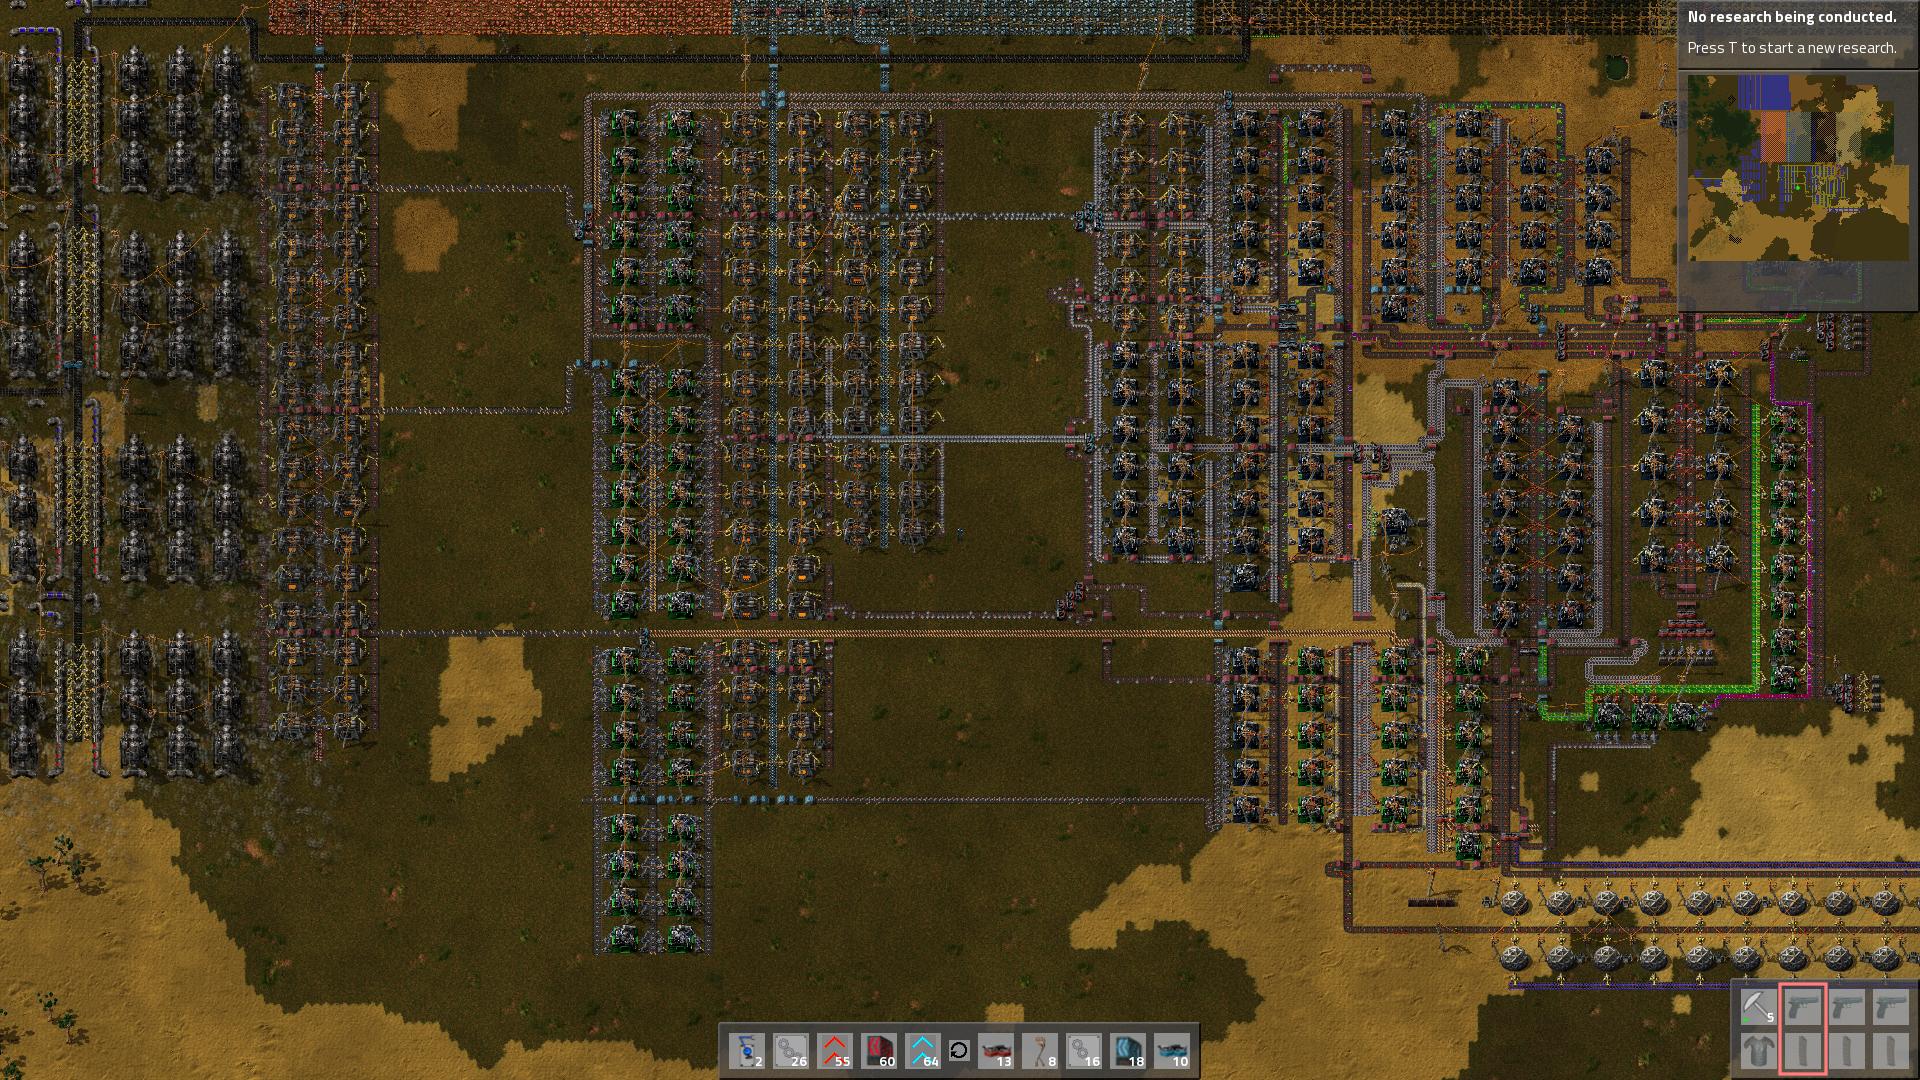 And this is what ive done for my first factory, only about 19 hours of gameplay tho... it's hard to balance outputs now, since theres such a massive production.